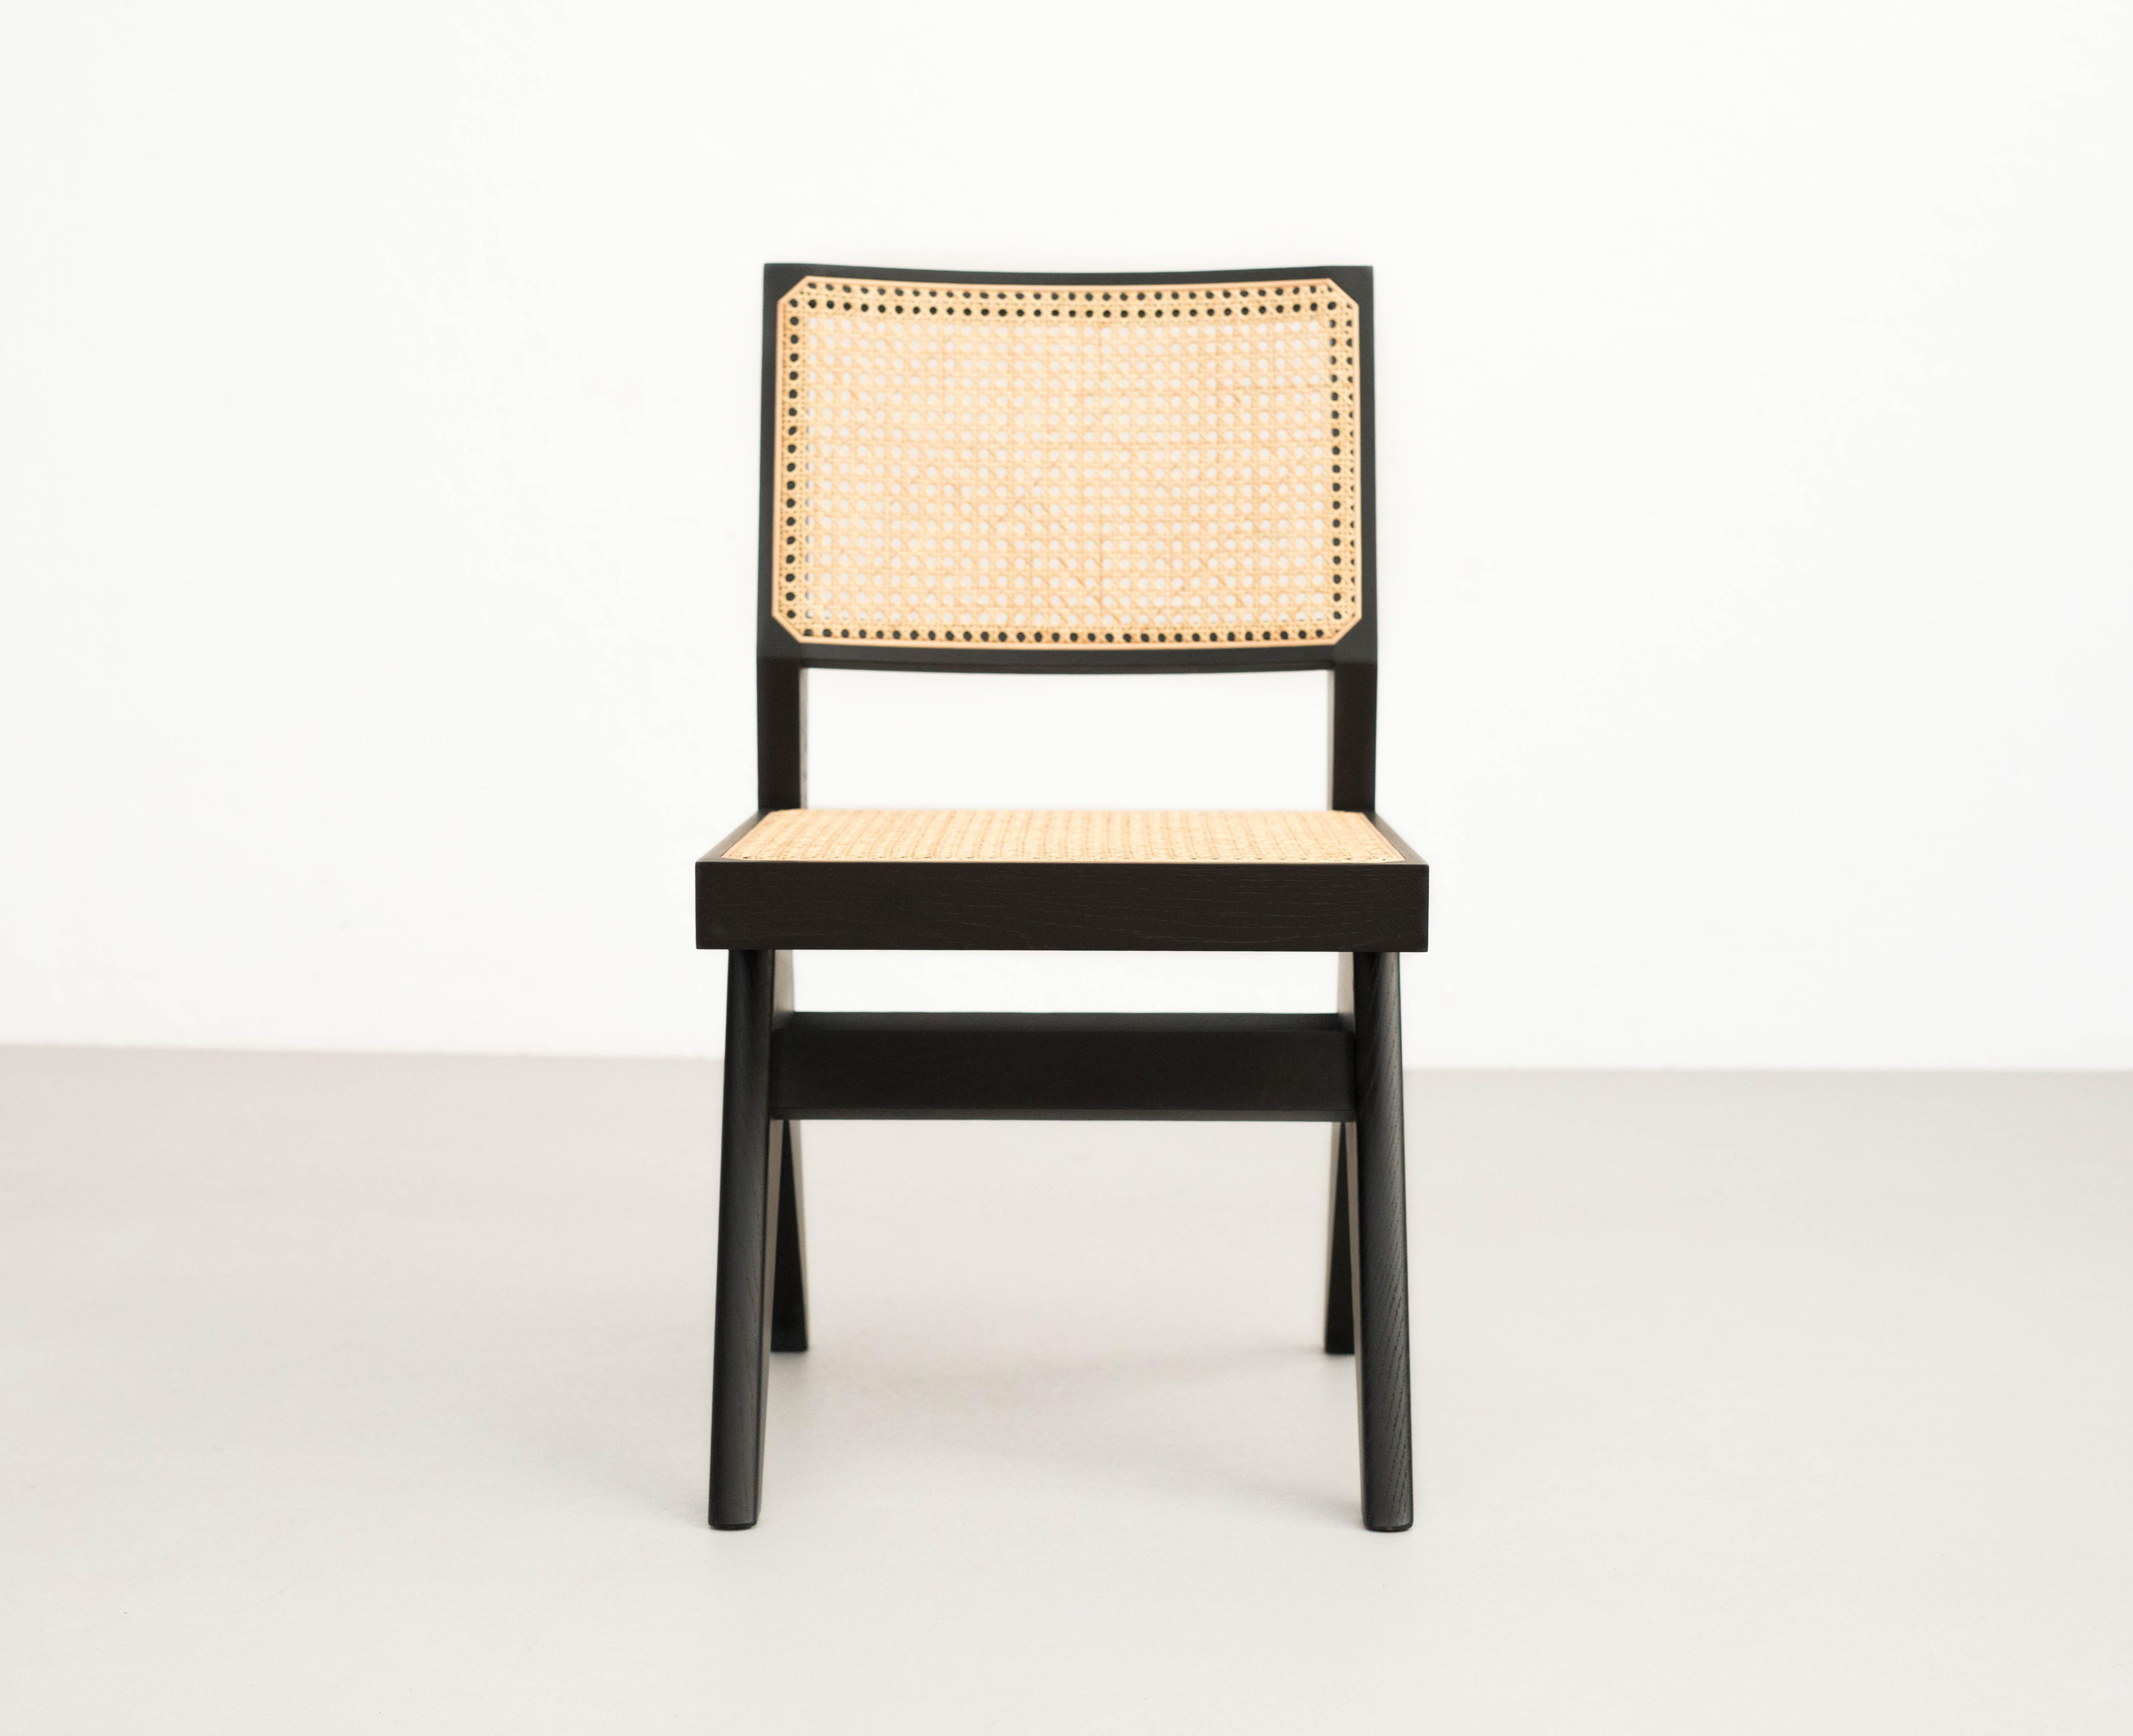 Chair designed by Pierre Jeanneret circa 1950, relaunched in 2019.
Manufactured by Cassina in Italy.

This chair is one of the most recognisable in Chandigarh’s Capitol Complex, found throughout the offices of the Secretariat. The independent